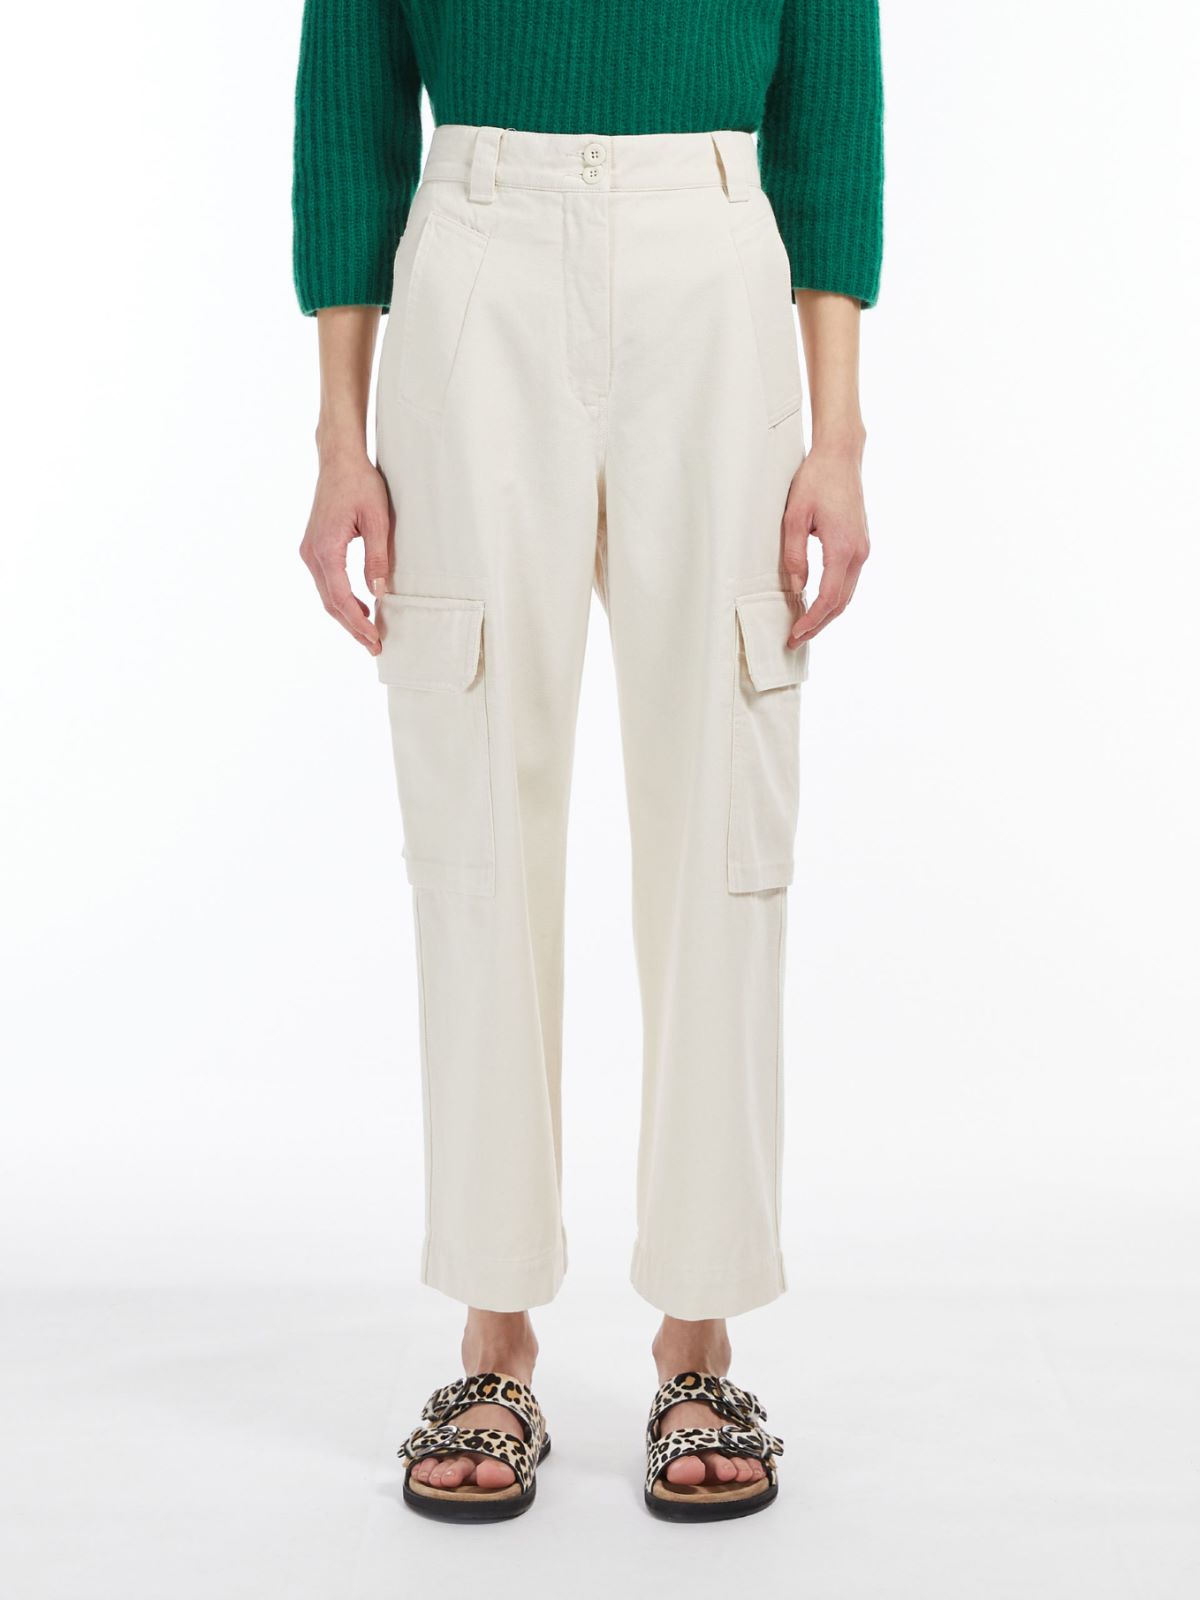 Cotton trousers - IVORY - Weekend Max Mara - 2